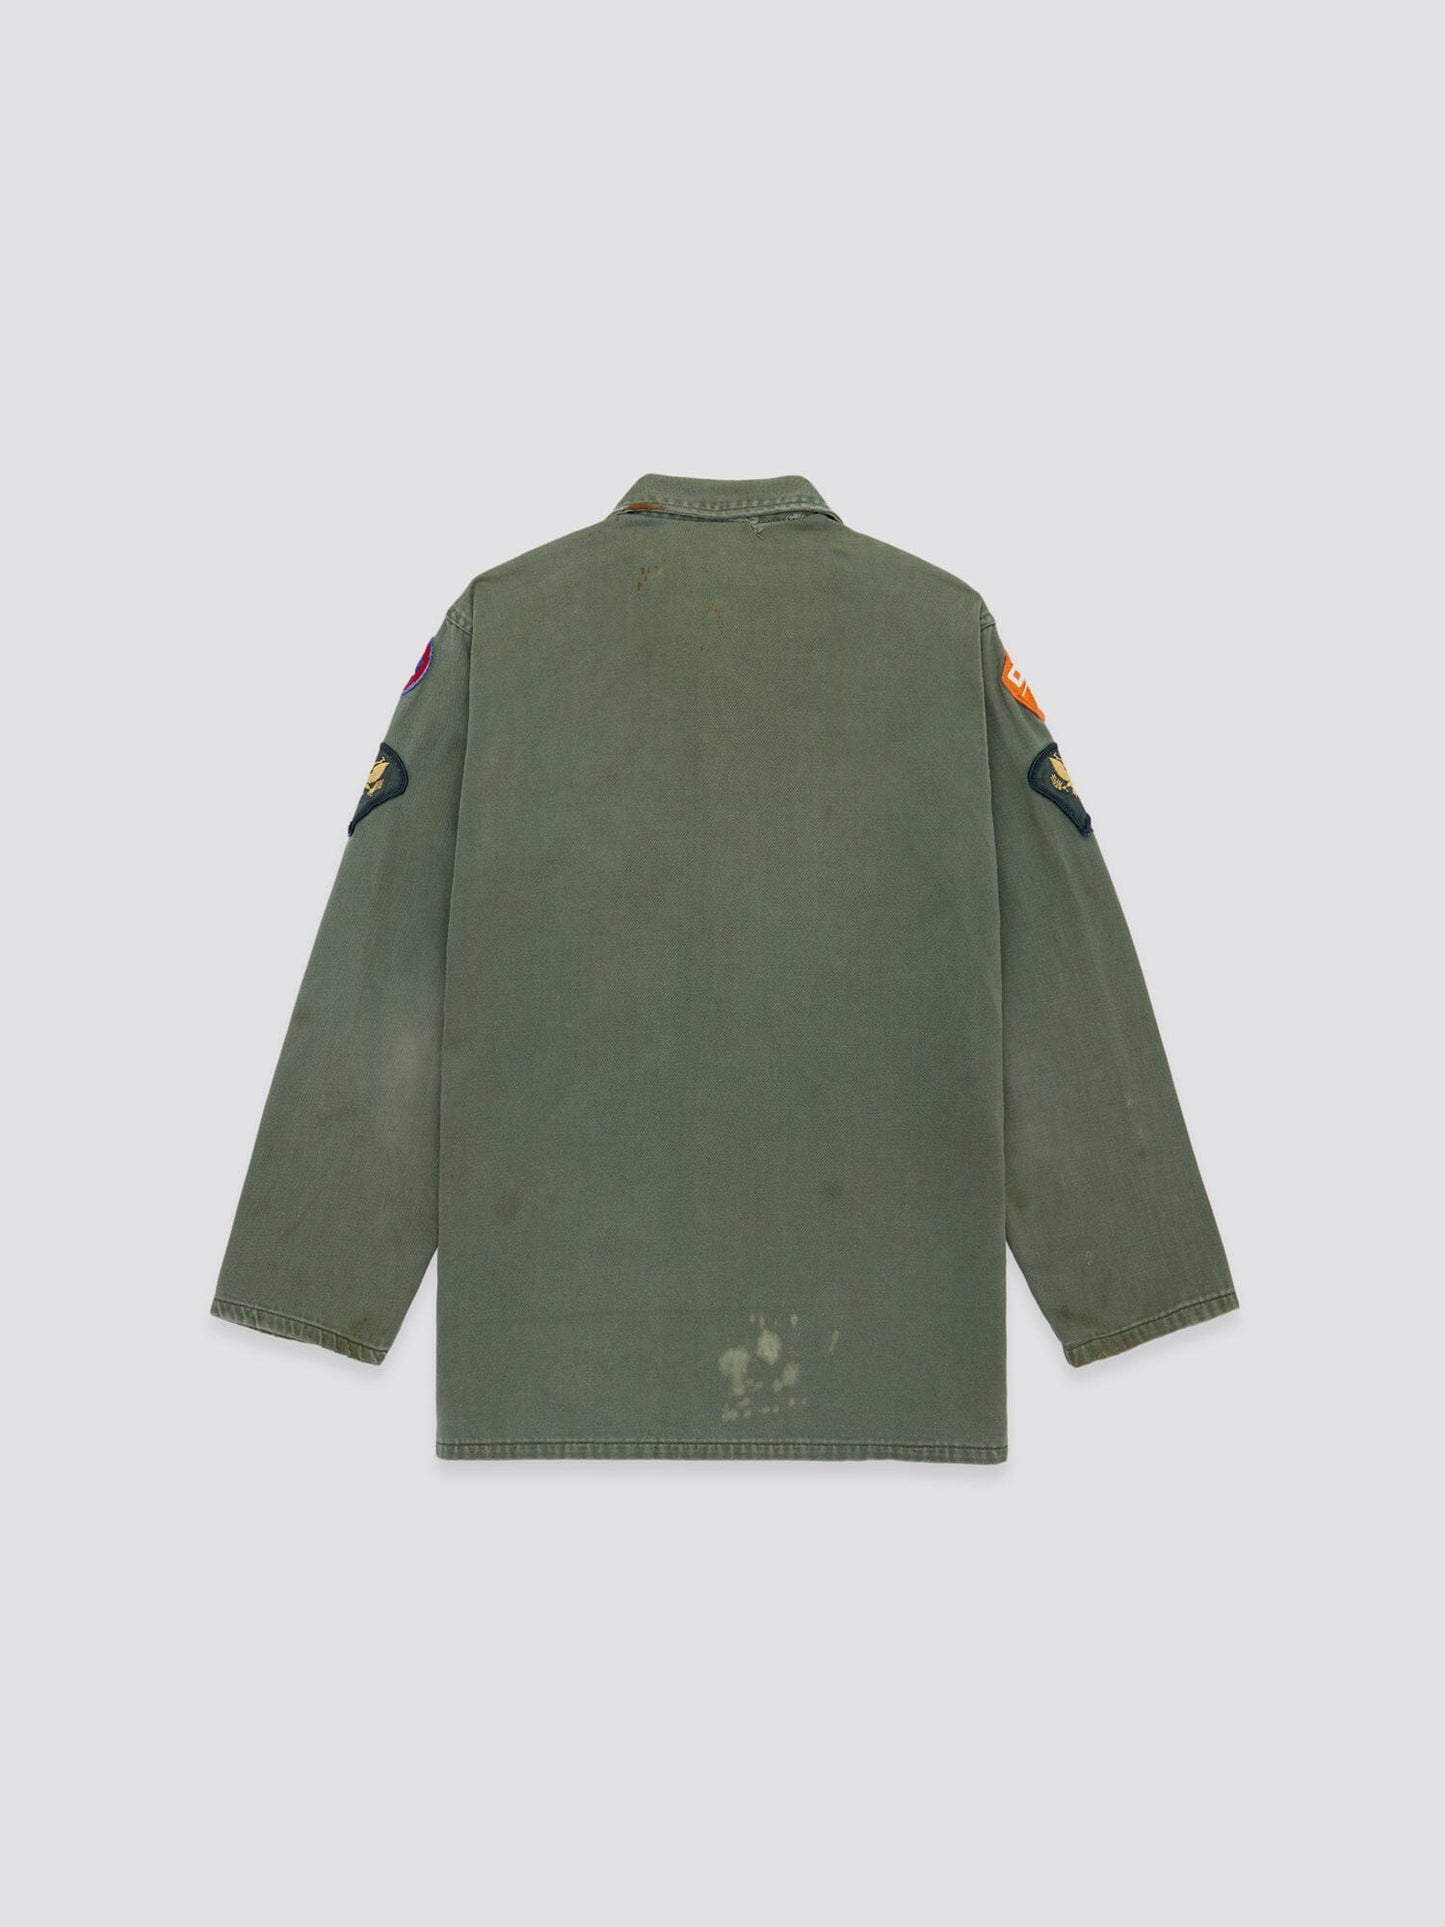 US ARMY SHIRT 3RD ARMY TOP Alpha Industries 